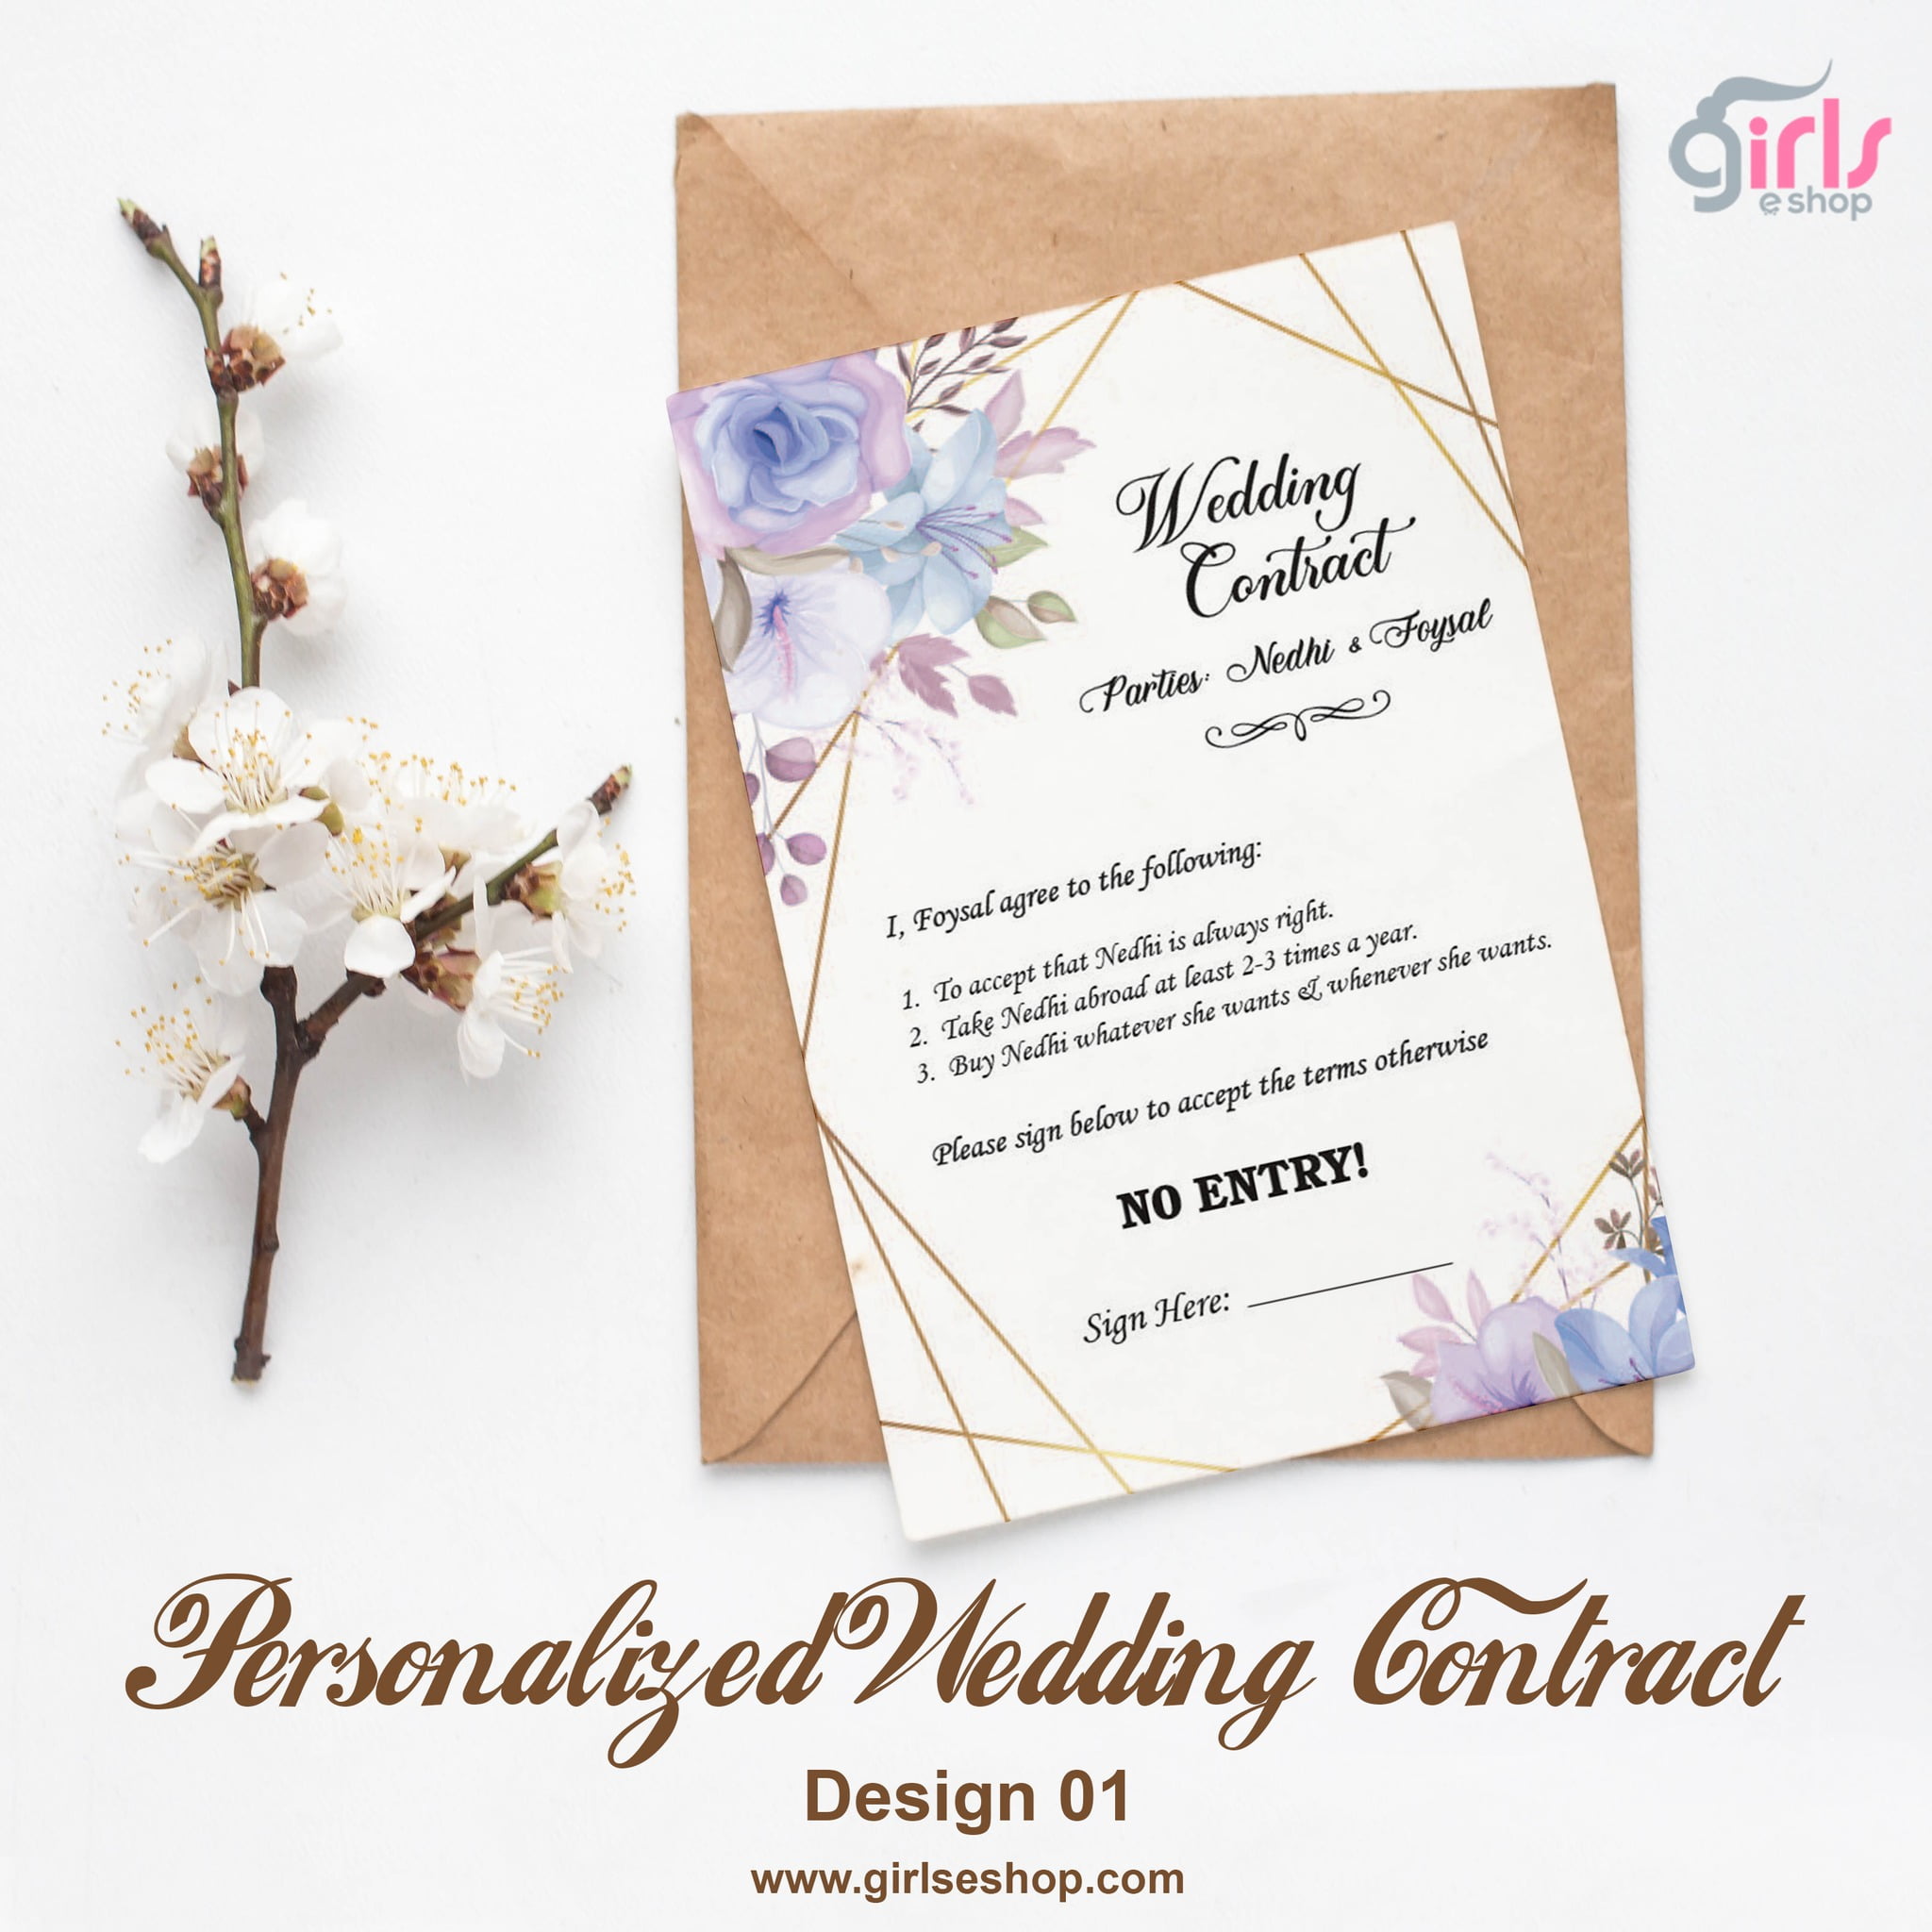 Personalized Wedding Contract - Love Contract - Design 01 - Girls